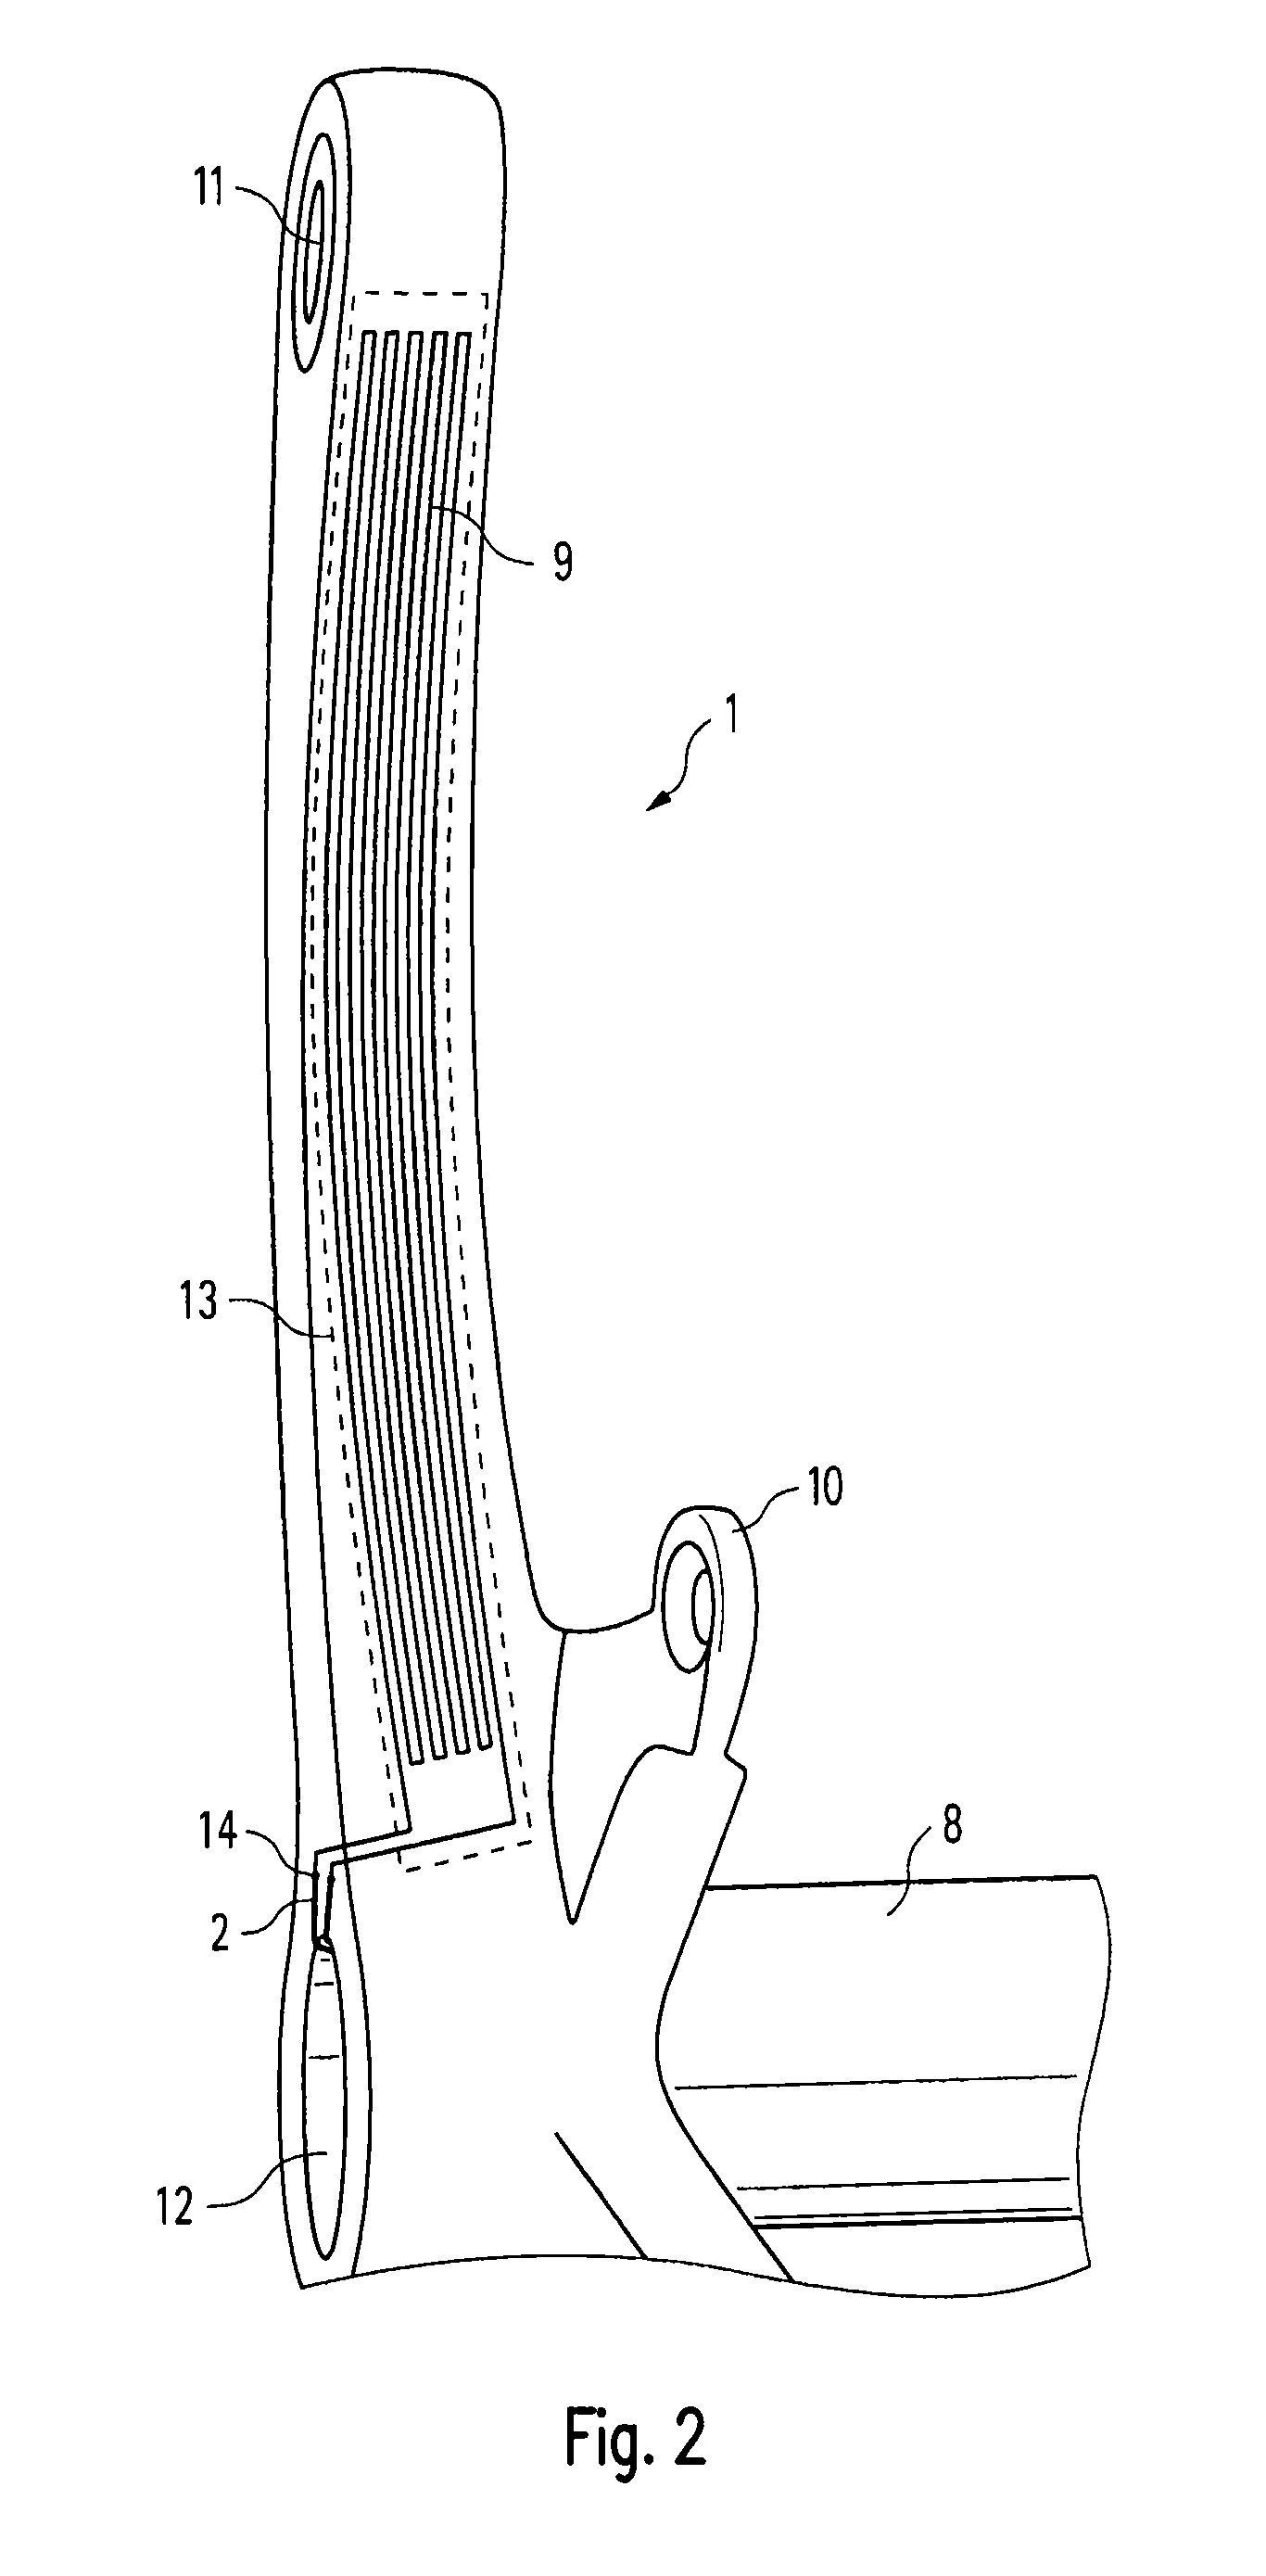 Crank arm, crankset, and power measuring device for an at least partially human powered vehicle or training device with a crank drive